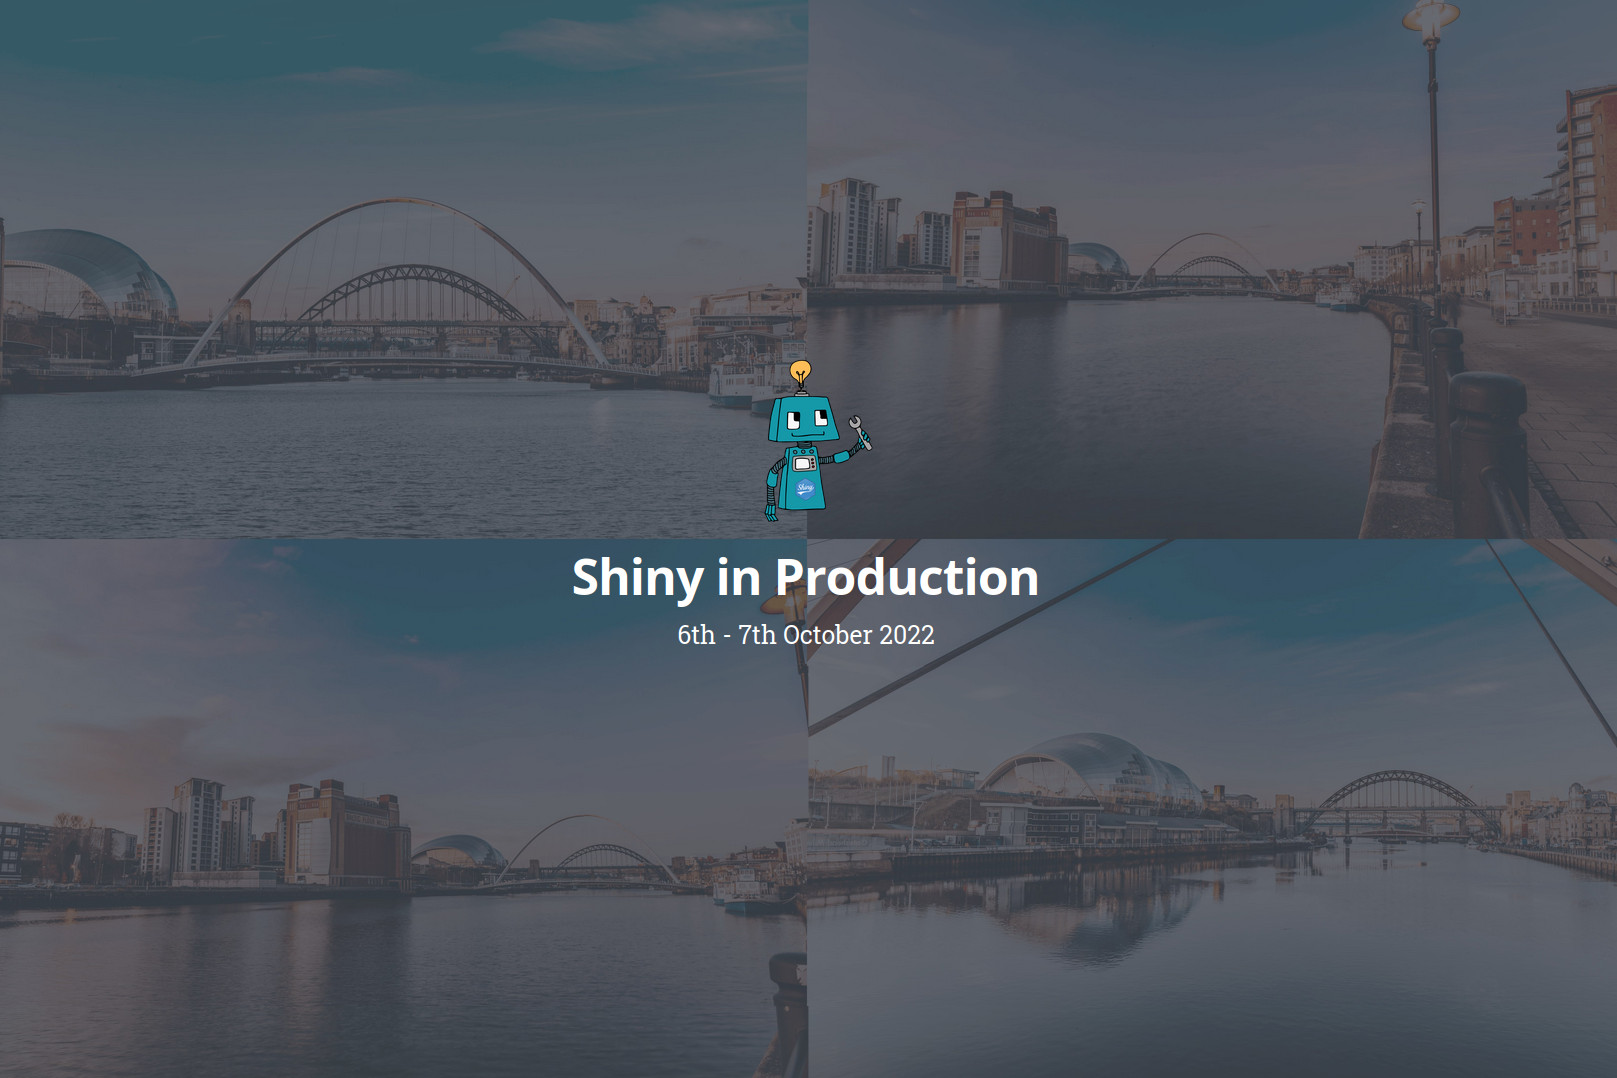 Four images of a city by the water. There's a drawing of a robot and underneath, text that says Shiny in Production, 6th through 7th October 2022.